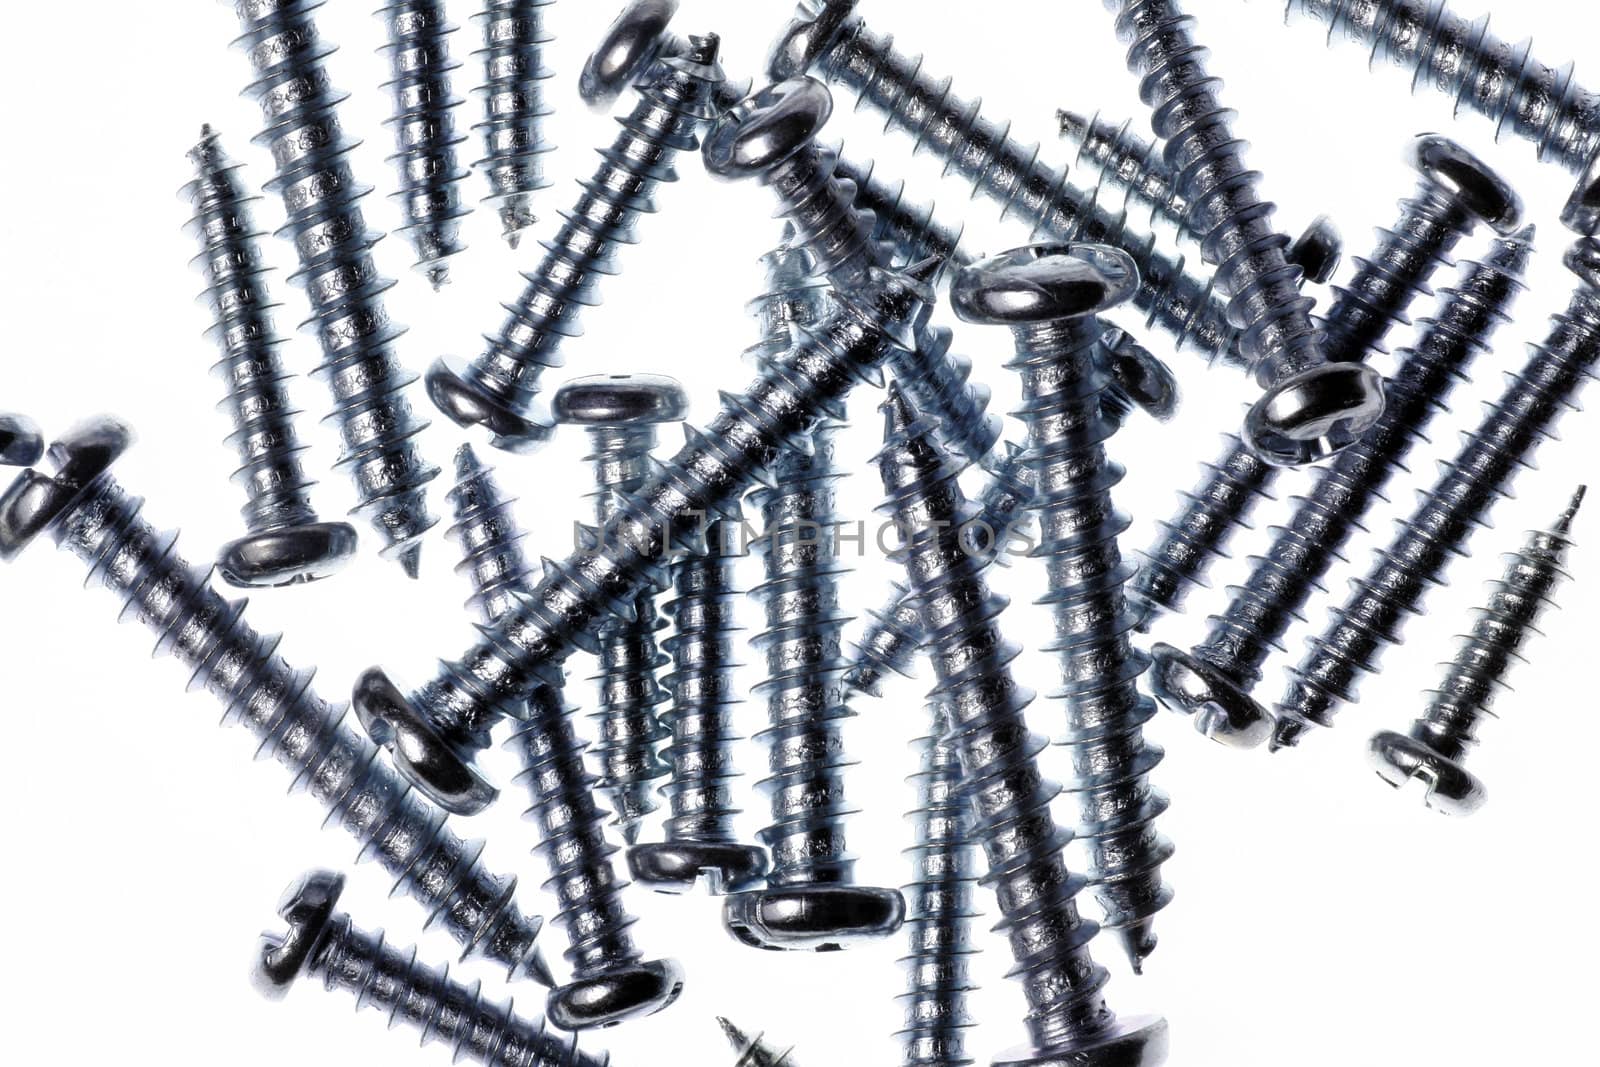 Macro Close-Up Of Spiral Metal Screws On A White Background